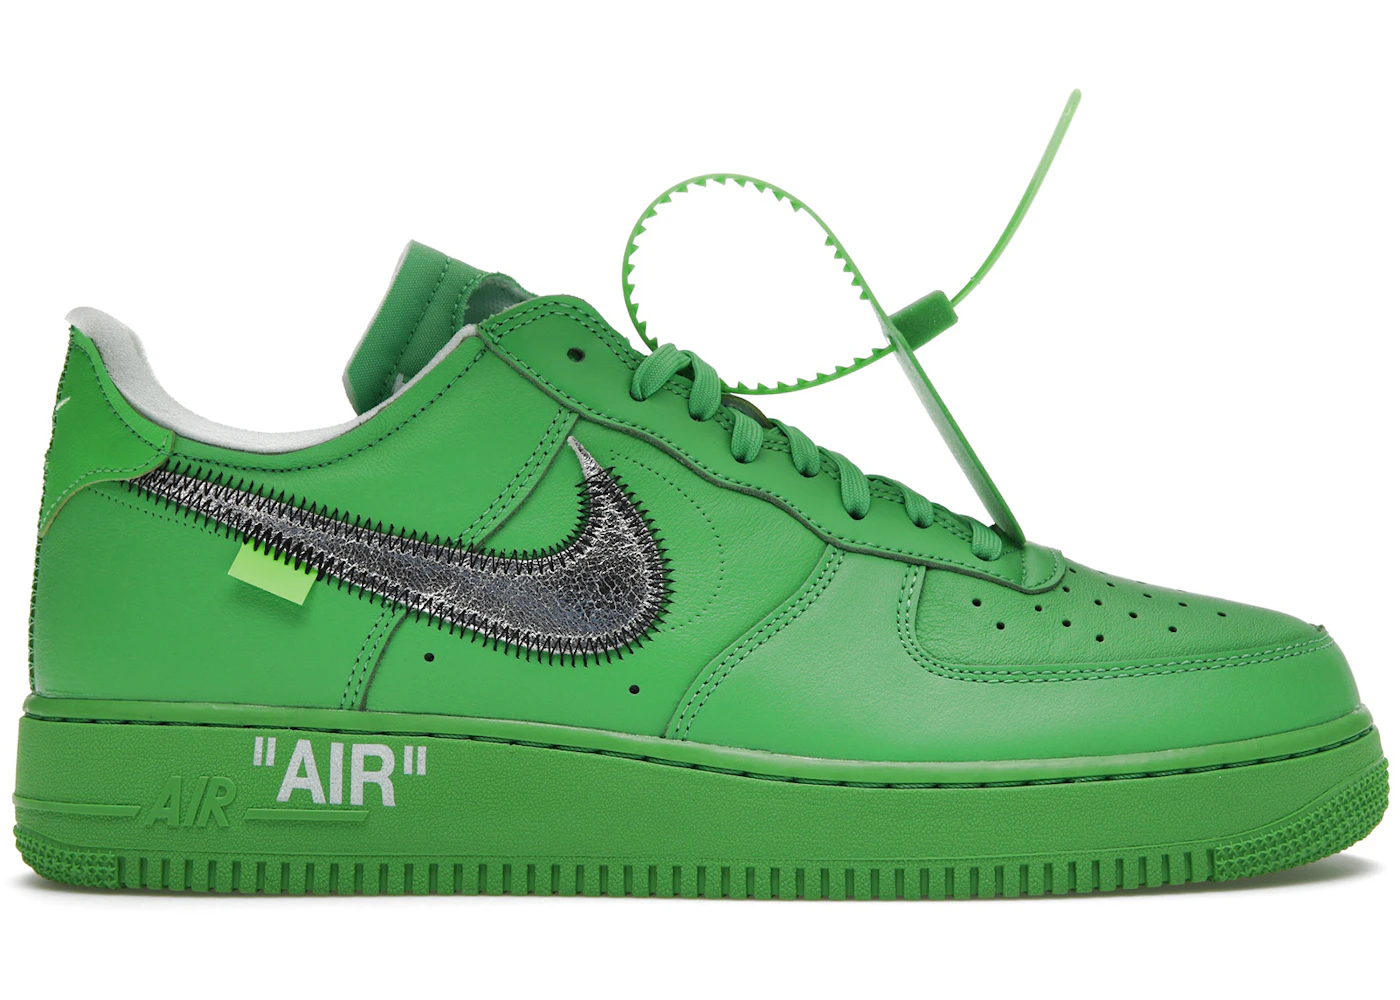 Exchange Unemployed mechanism Nike Air Force 1 Low Off-White Brooklyn - DX1419-300 - US